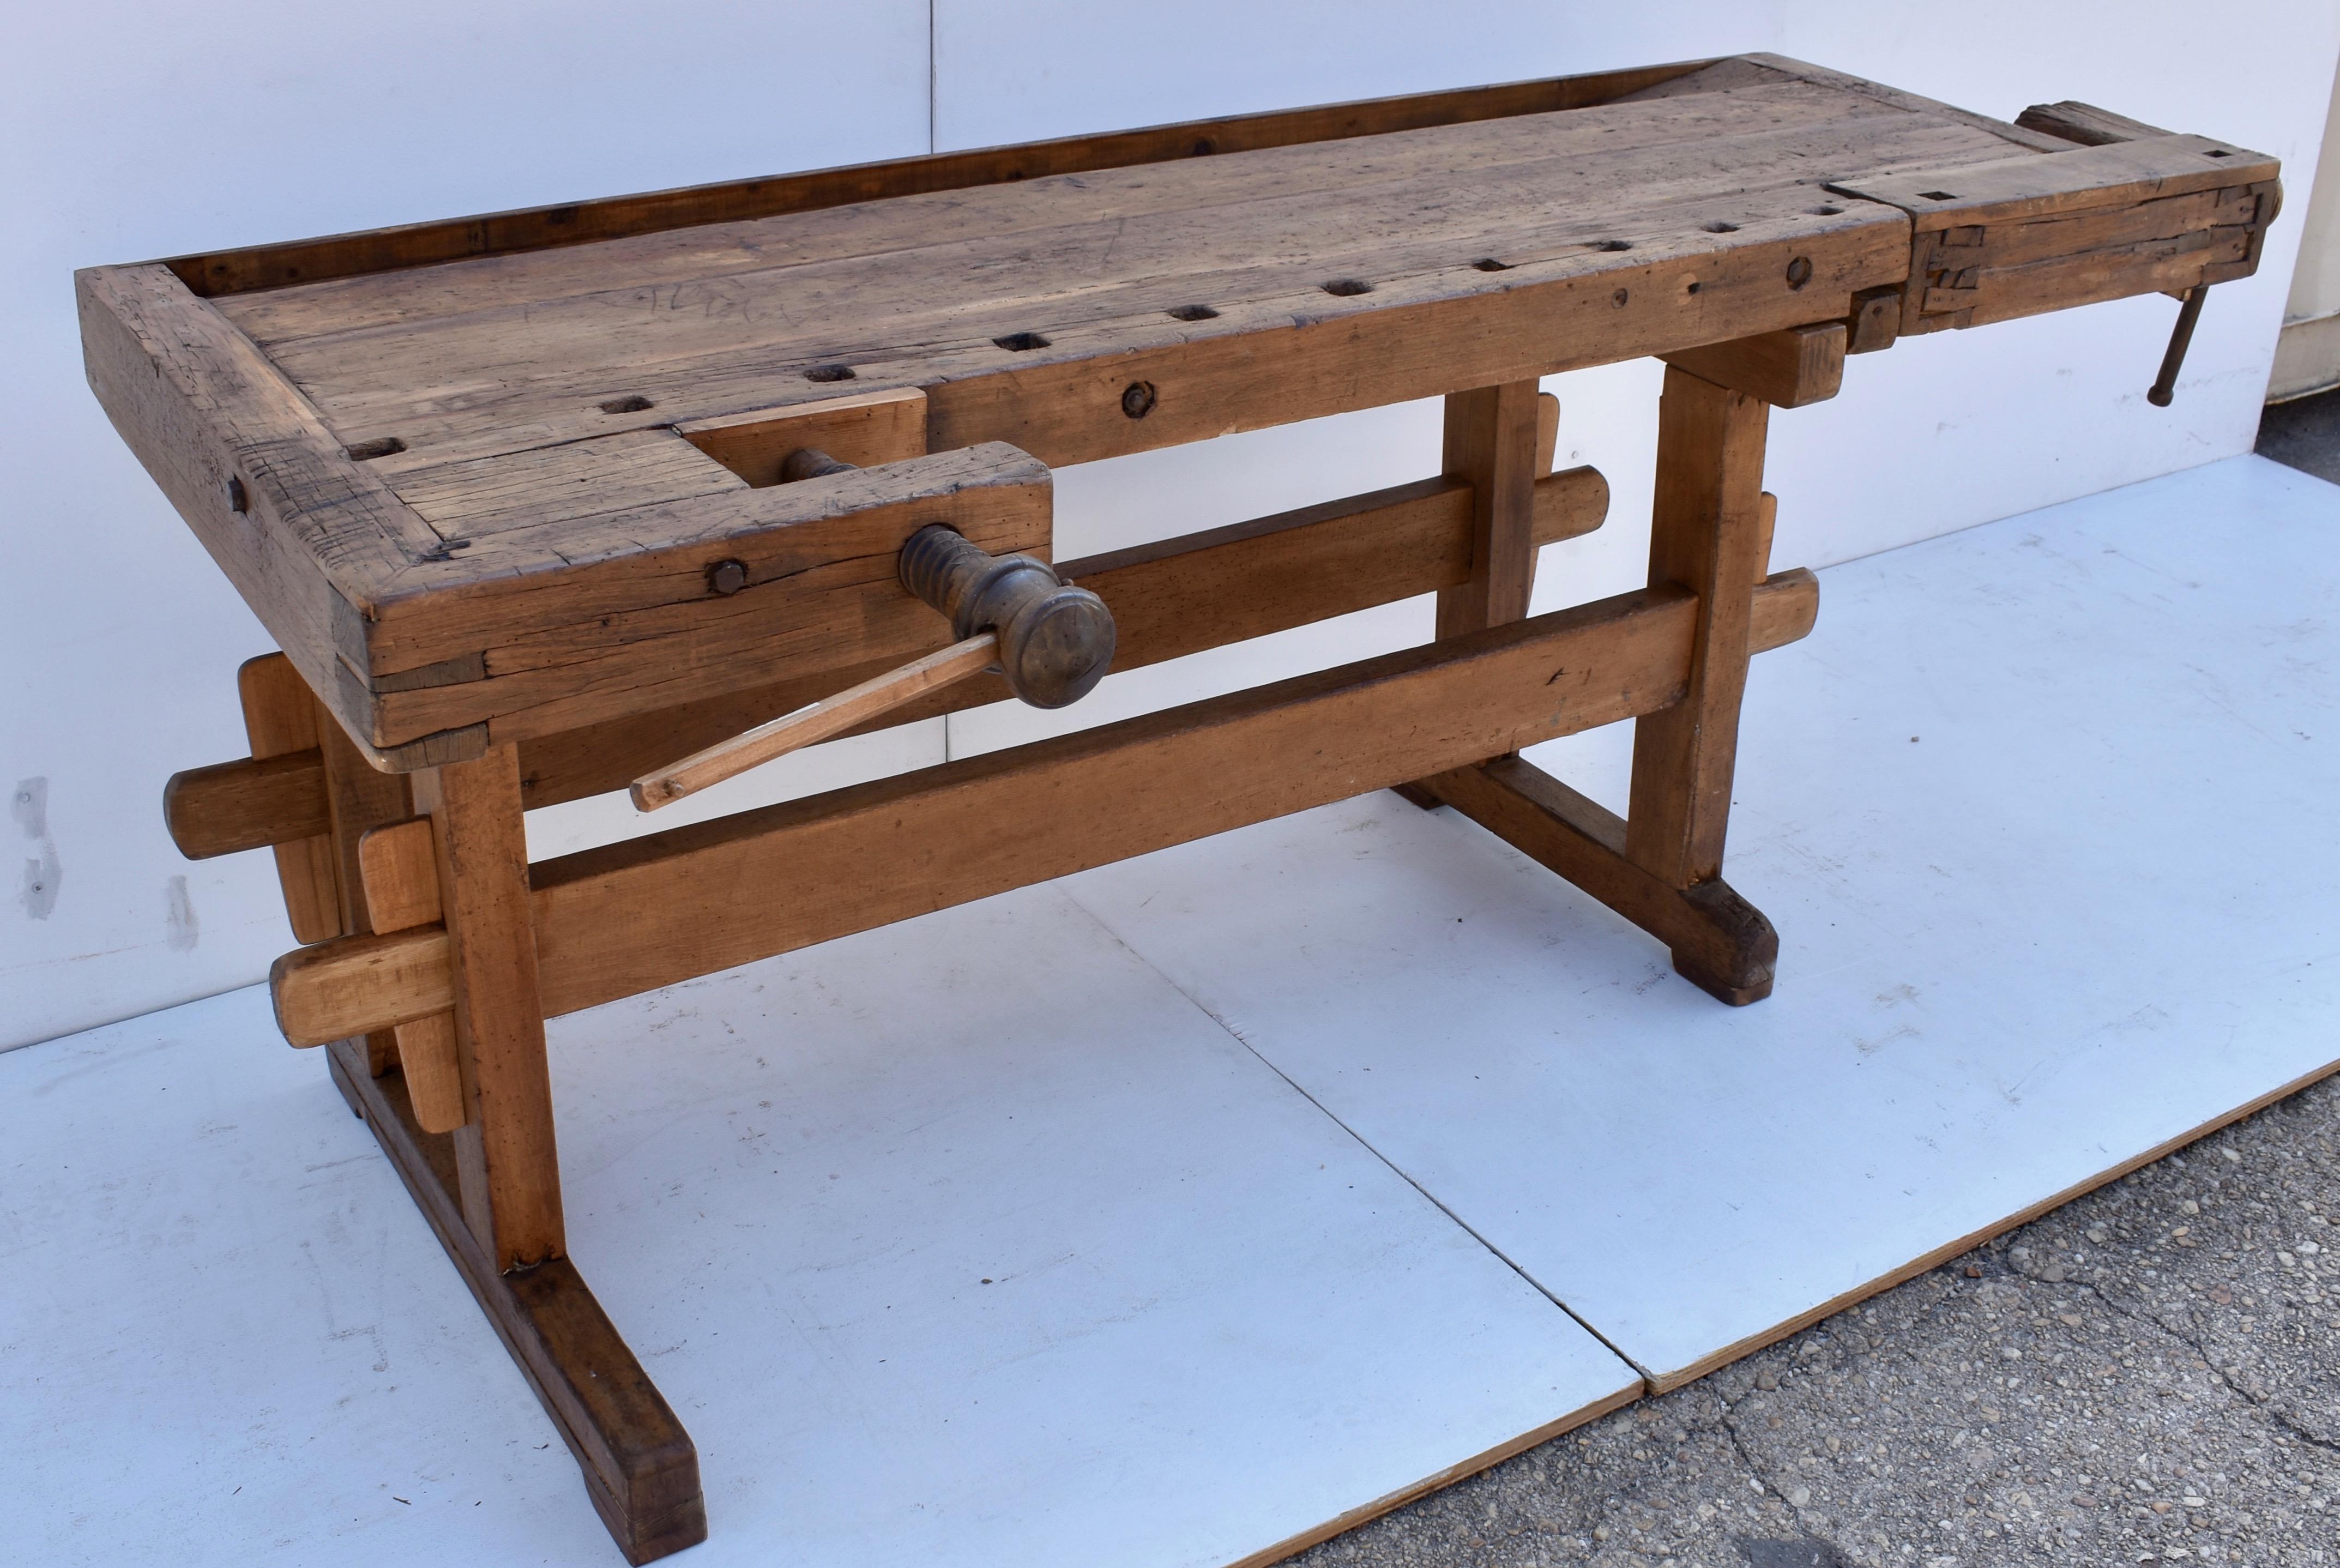 antique woodworking bench